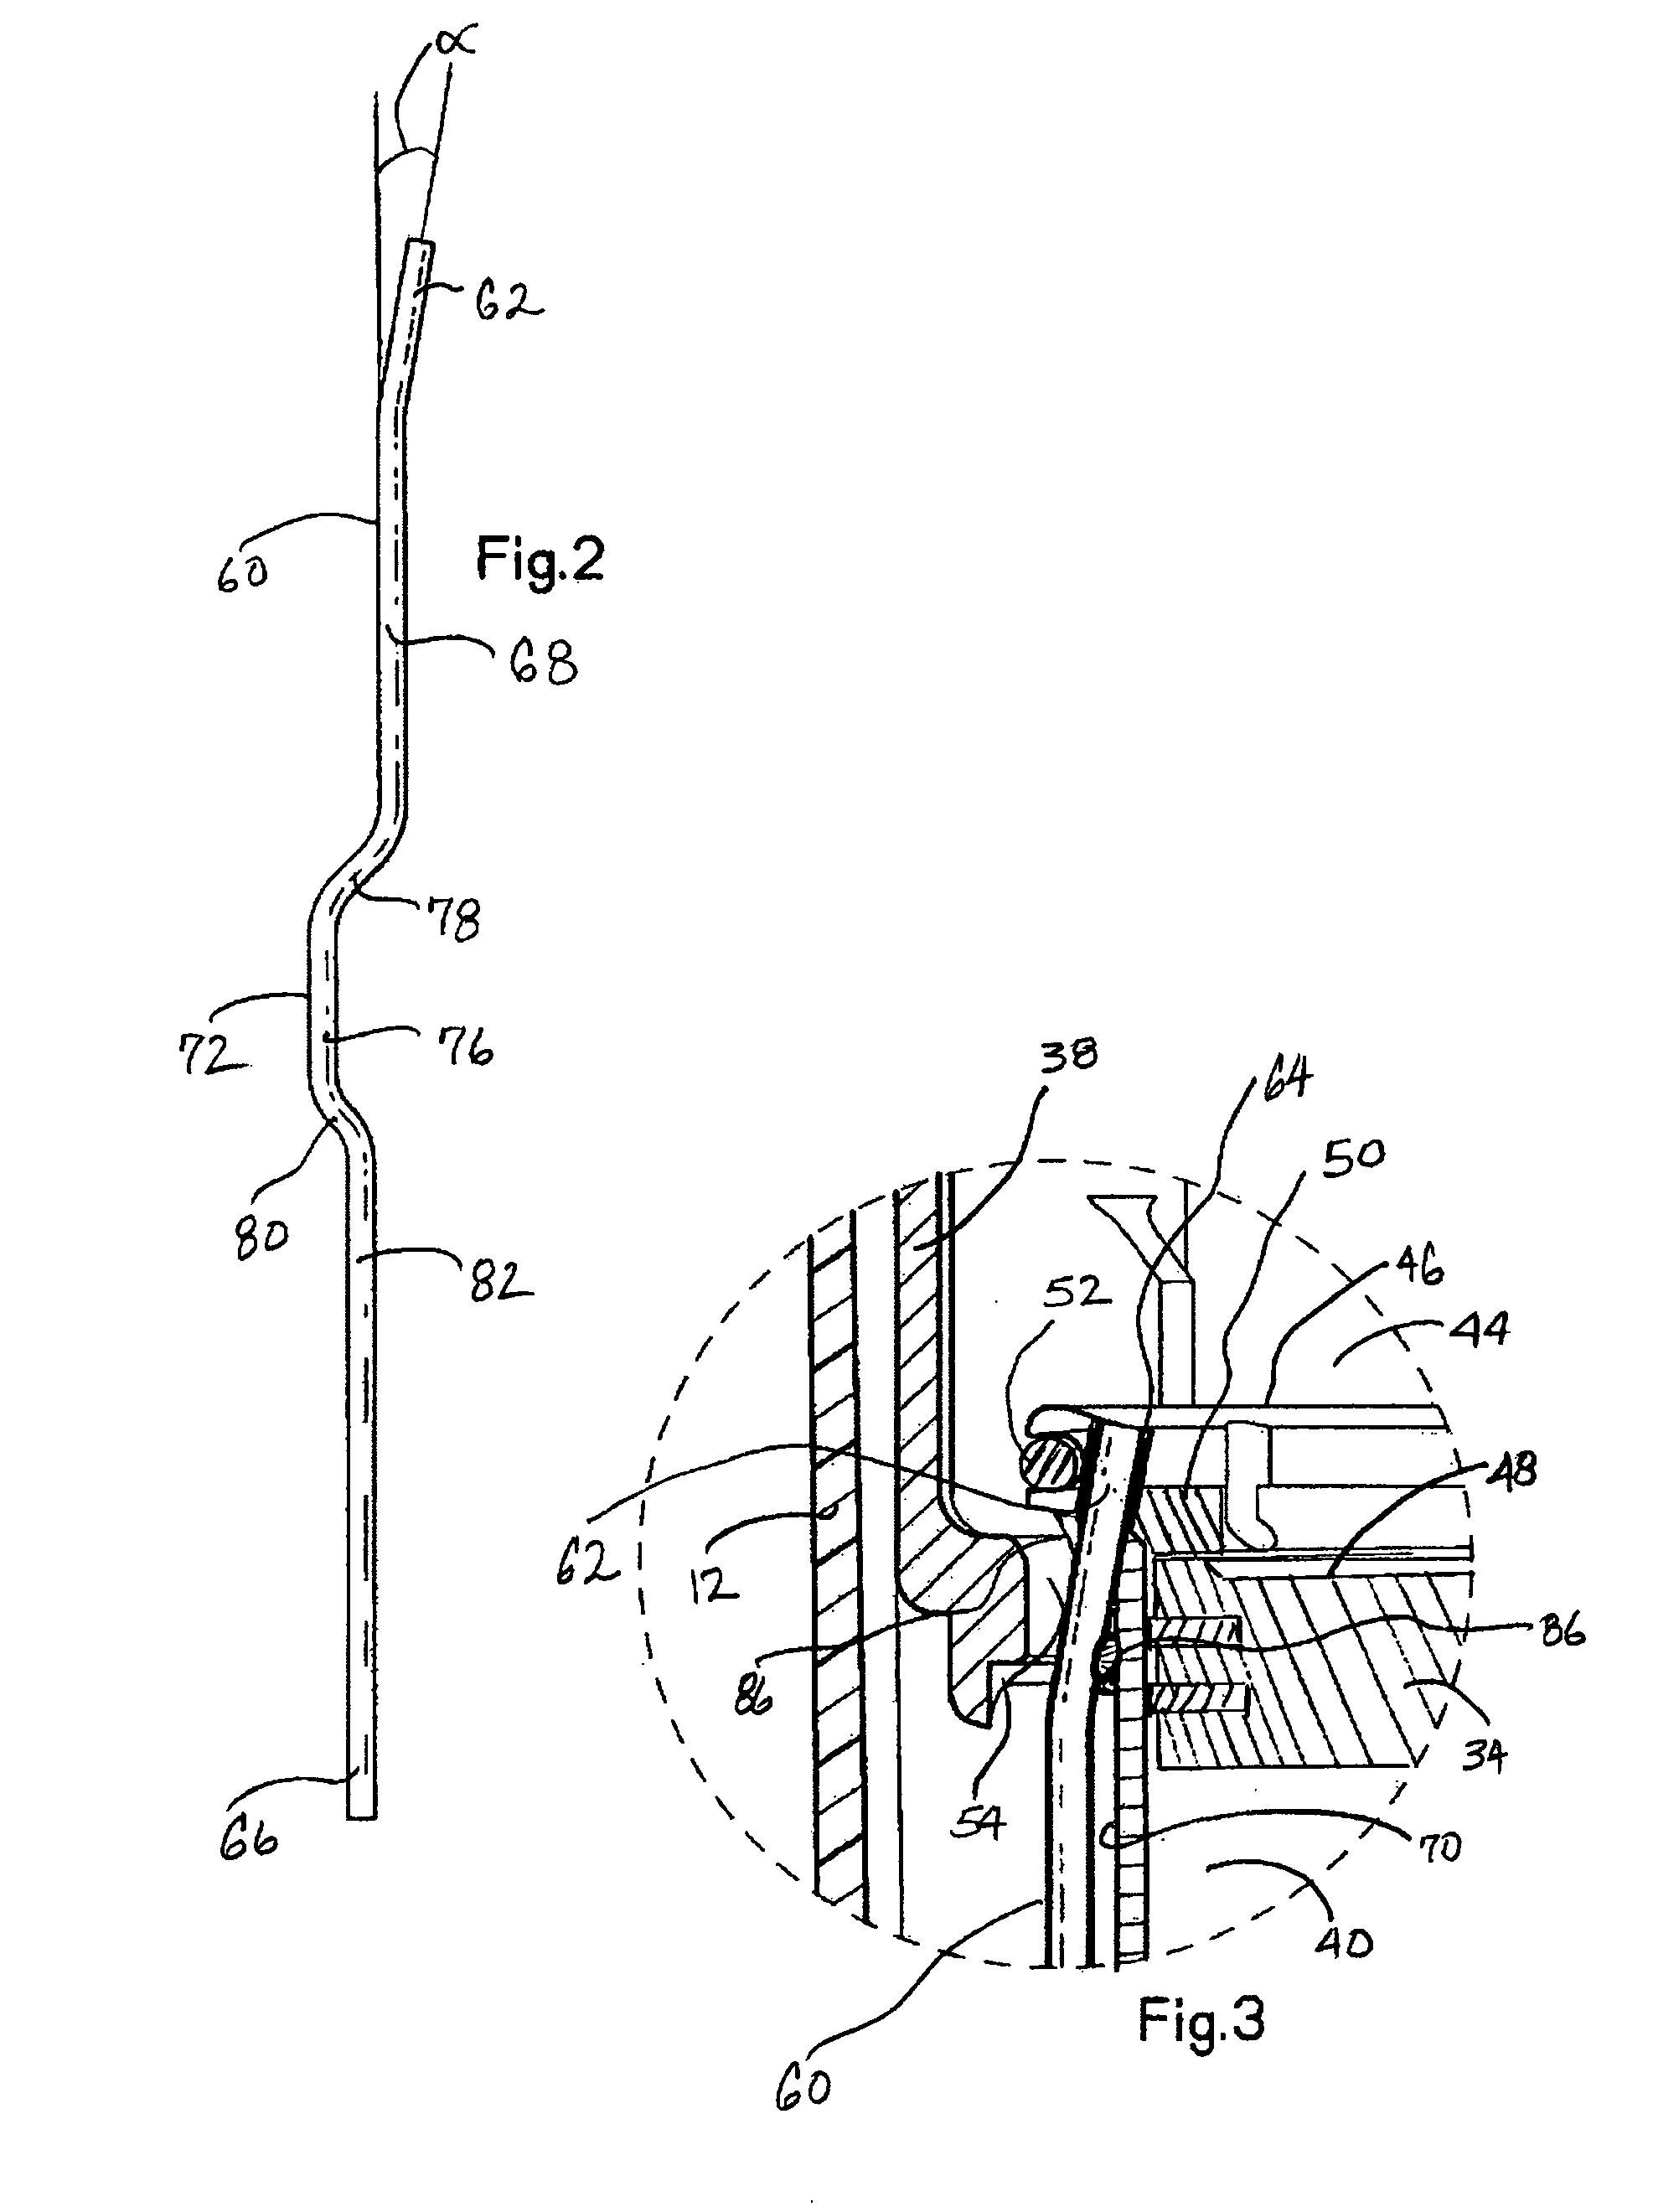 Gas driven actuation feed tube for combustion powered fastener-driving tool